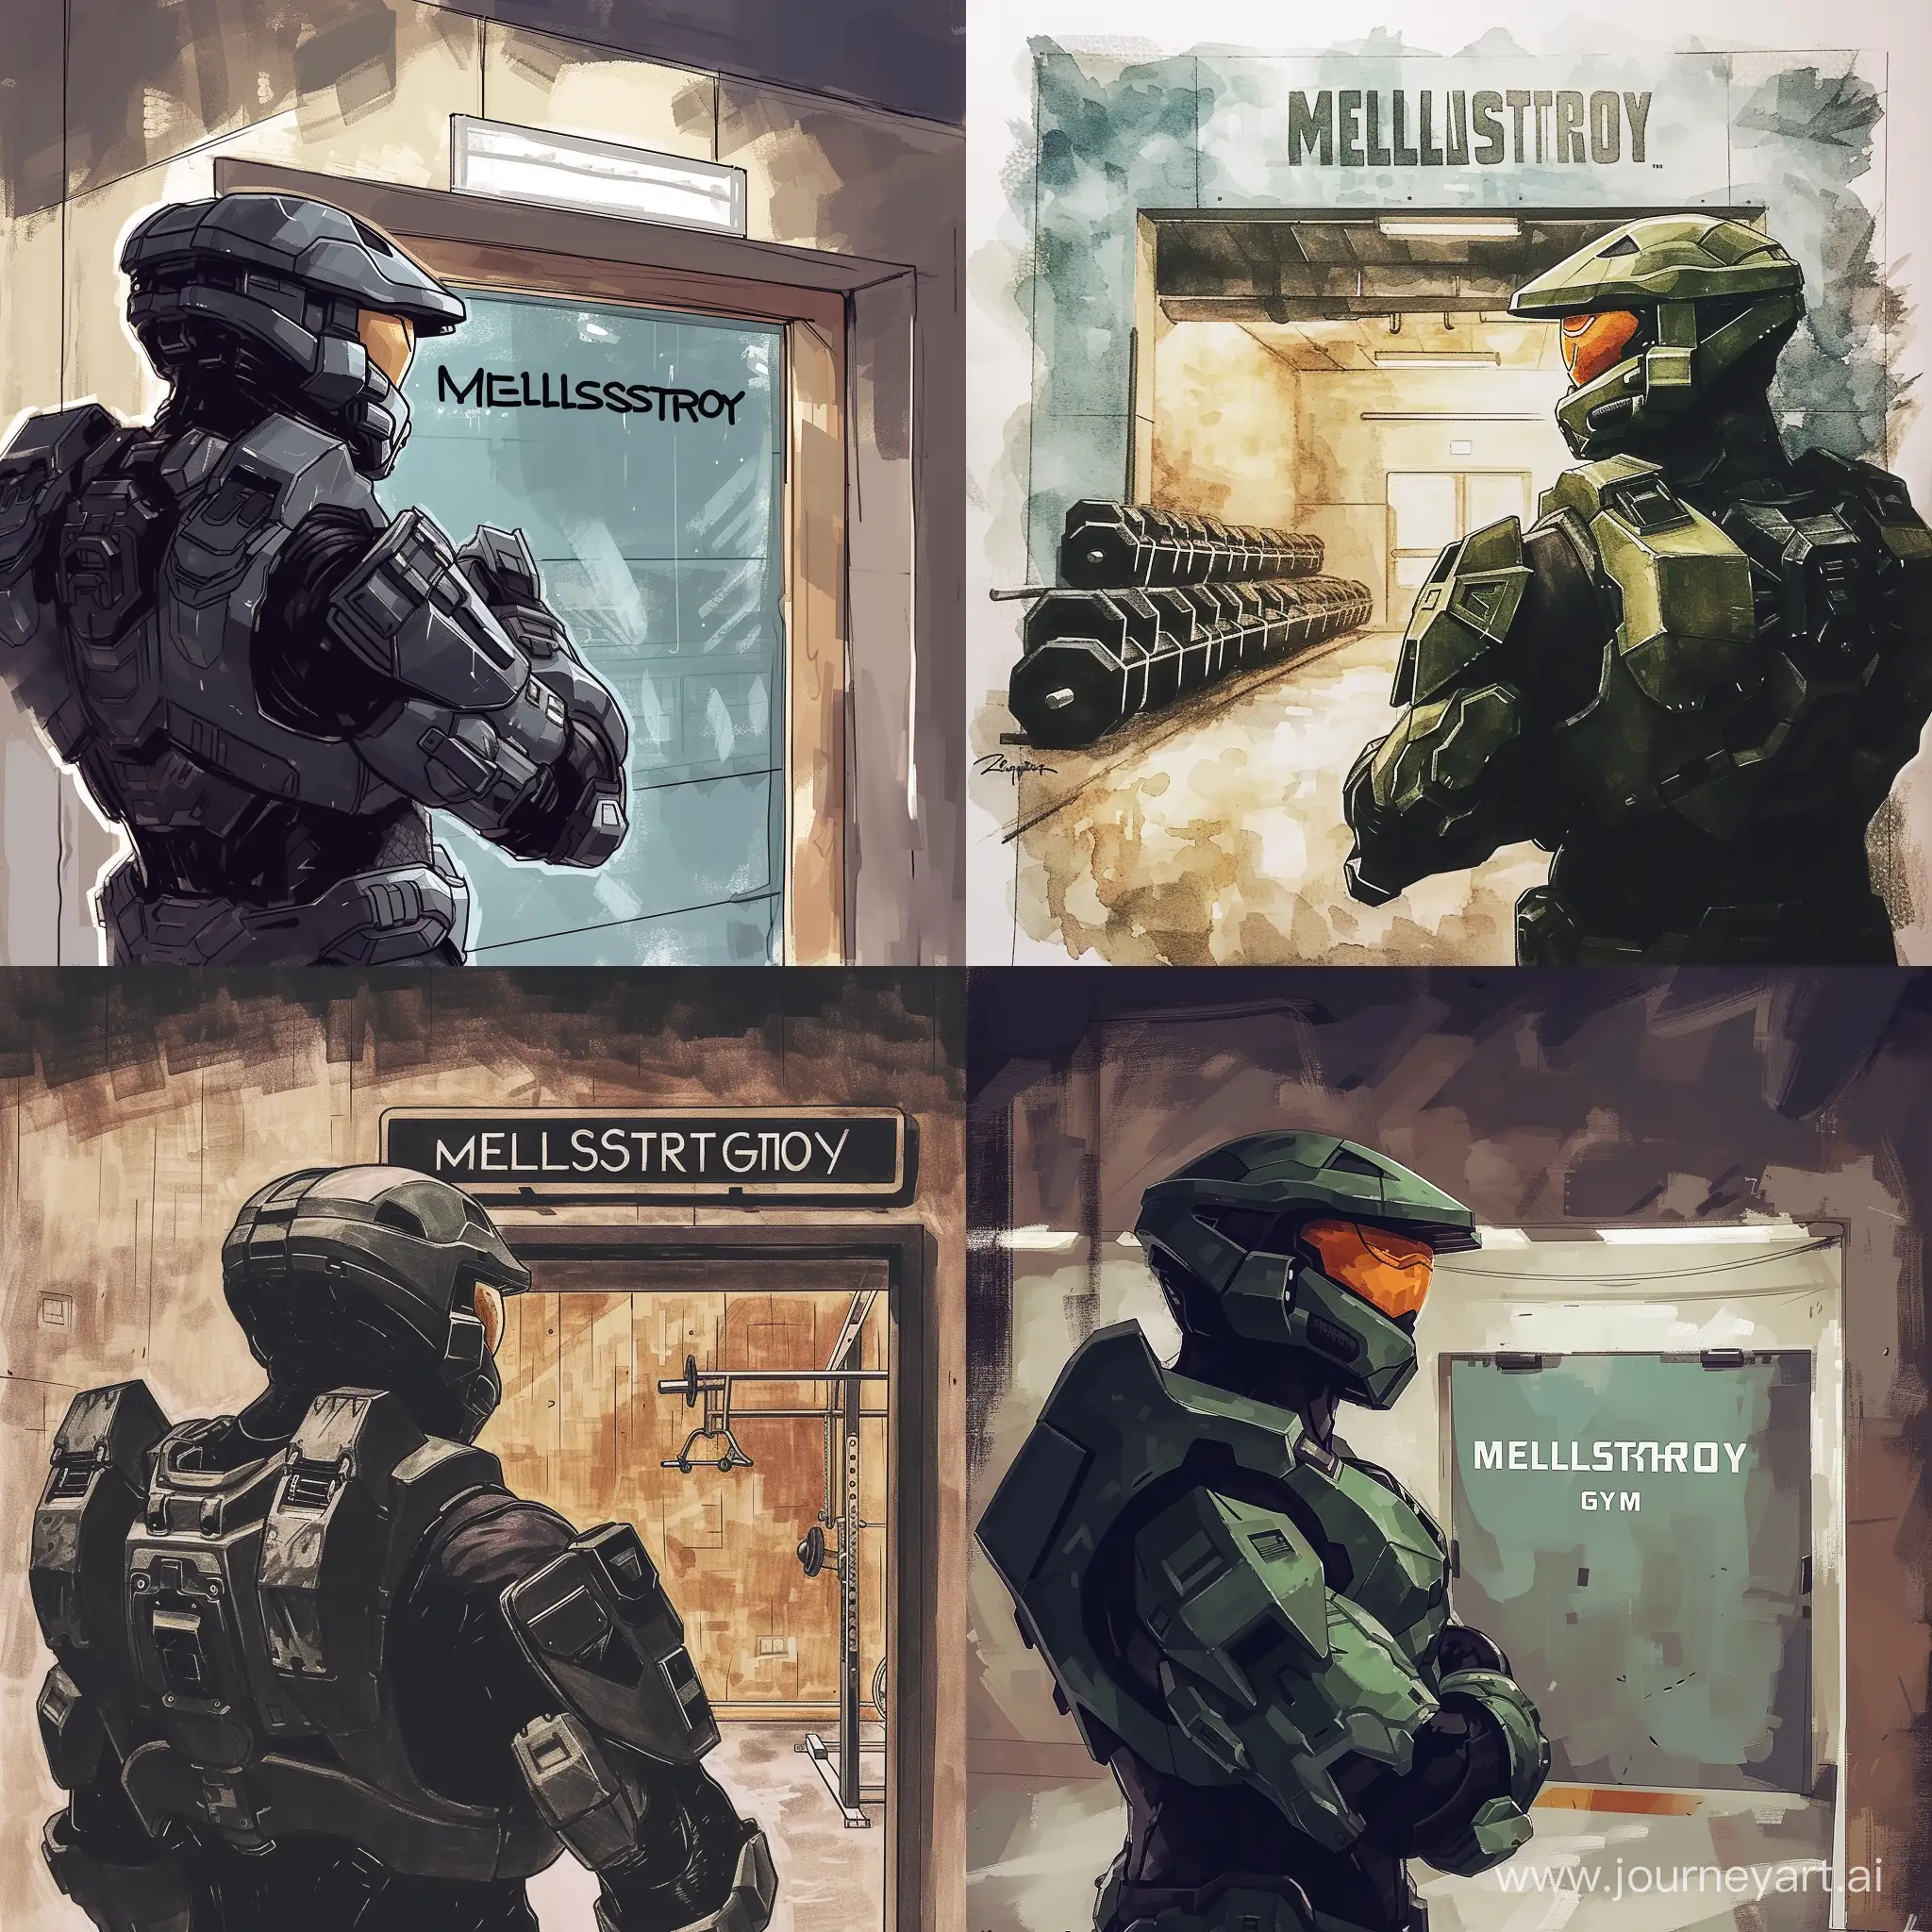 Draw a Master Chief looking at the entrance to the gym with the name "MELLSTROY GYM". Фото в одном экземпляре.